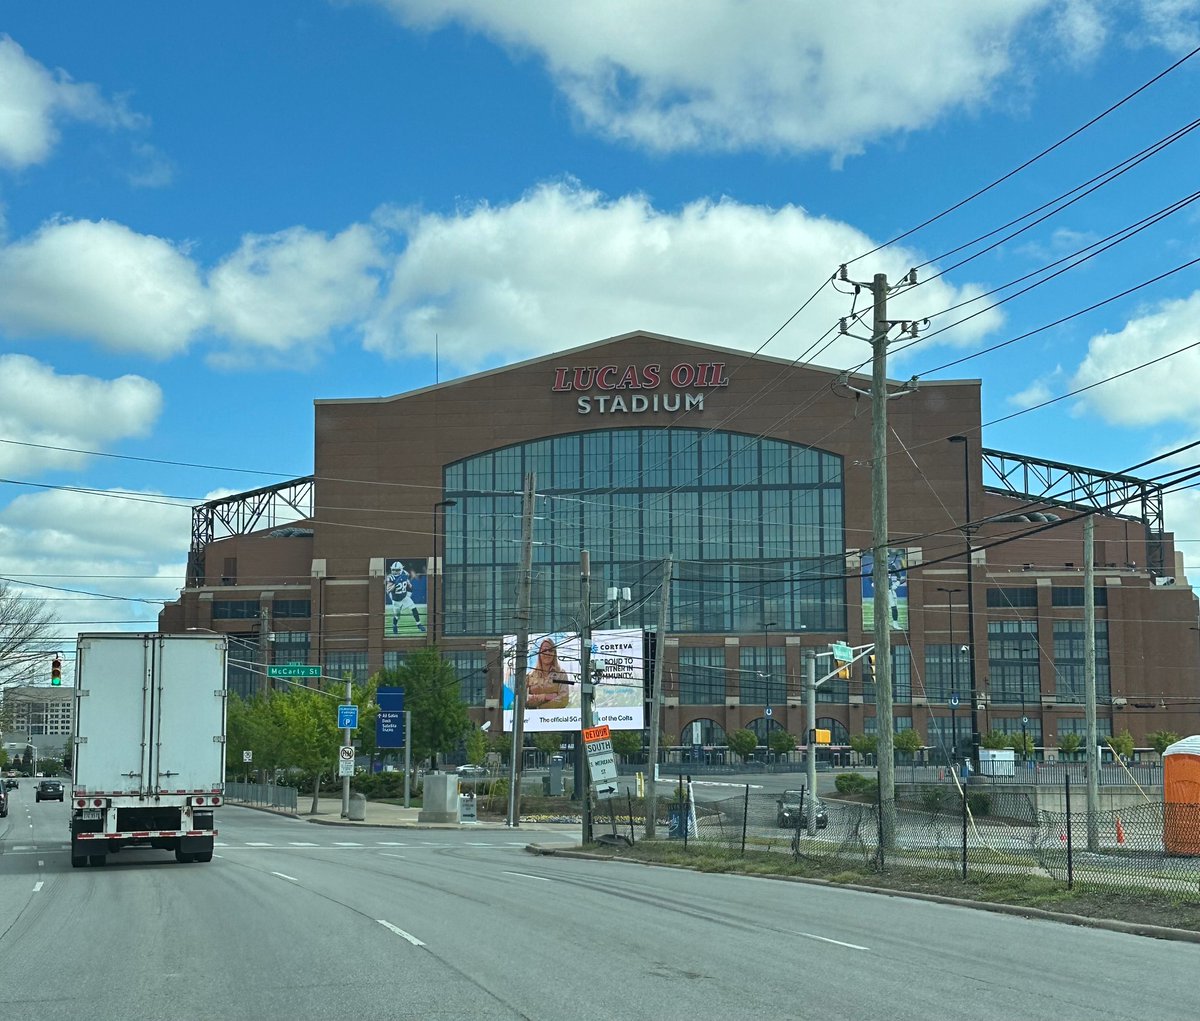 Spent the weekend in Indianapolis. Passed @LucasOilStadium. It's extremely nice!